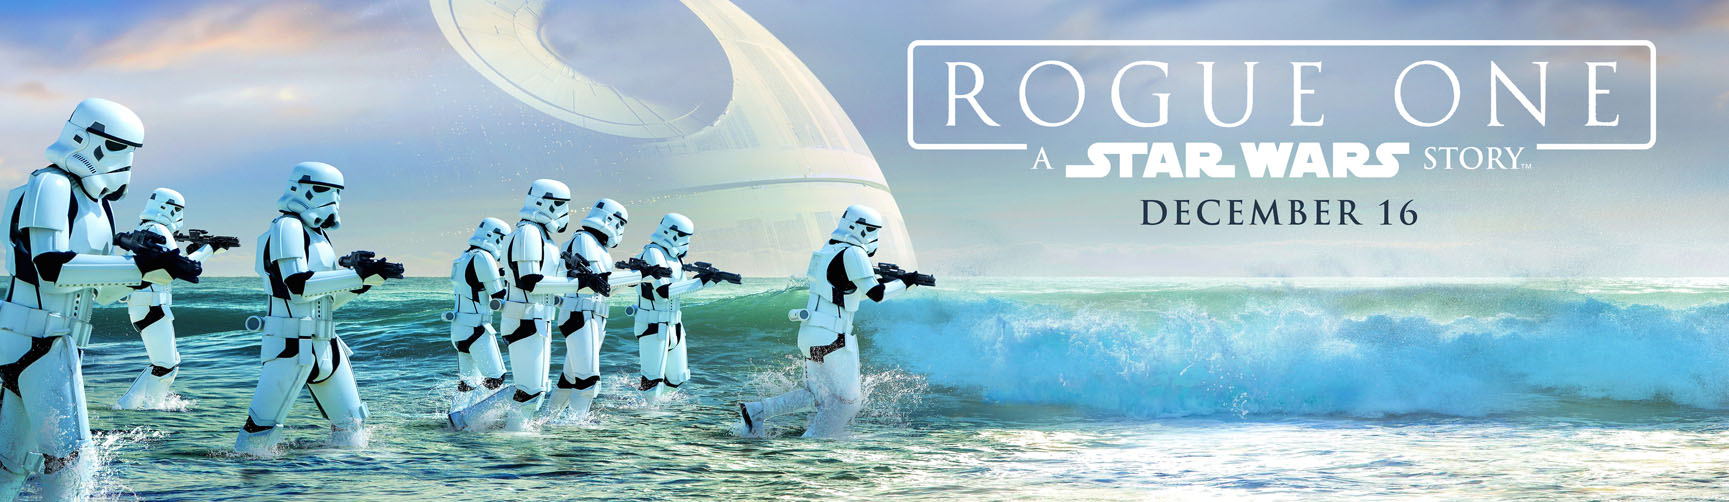 Rogue One: A Star Wars Story - Storm Troopers